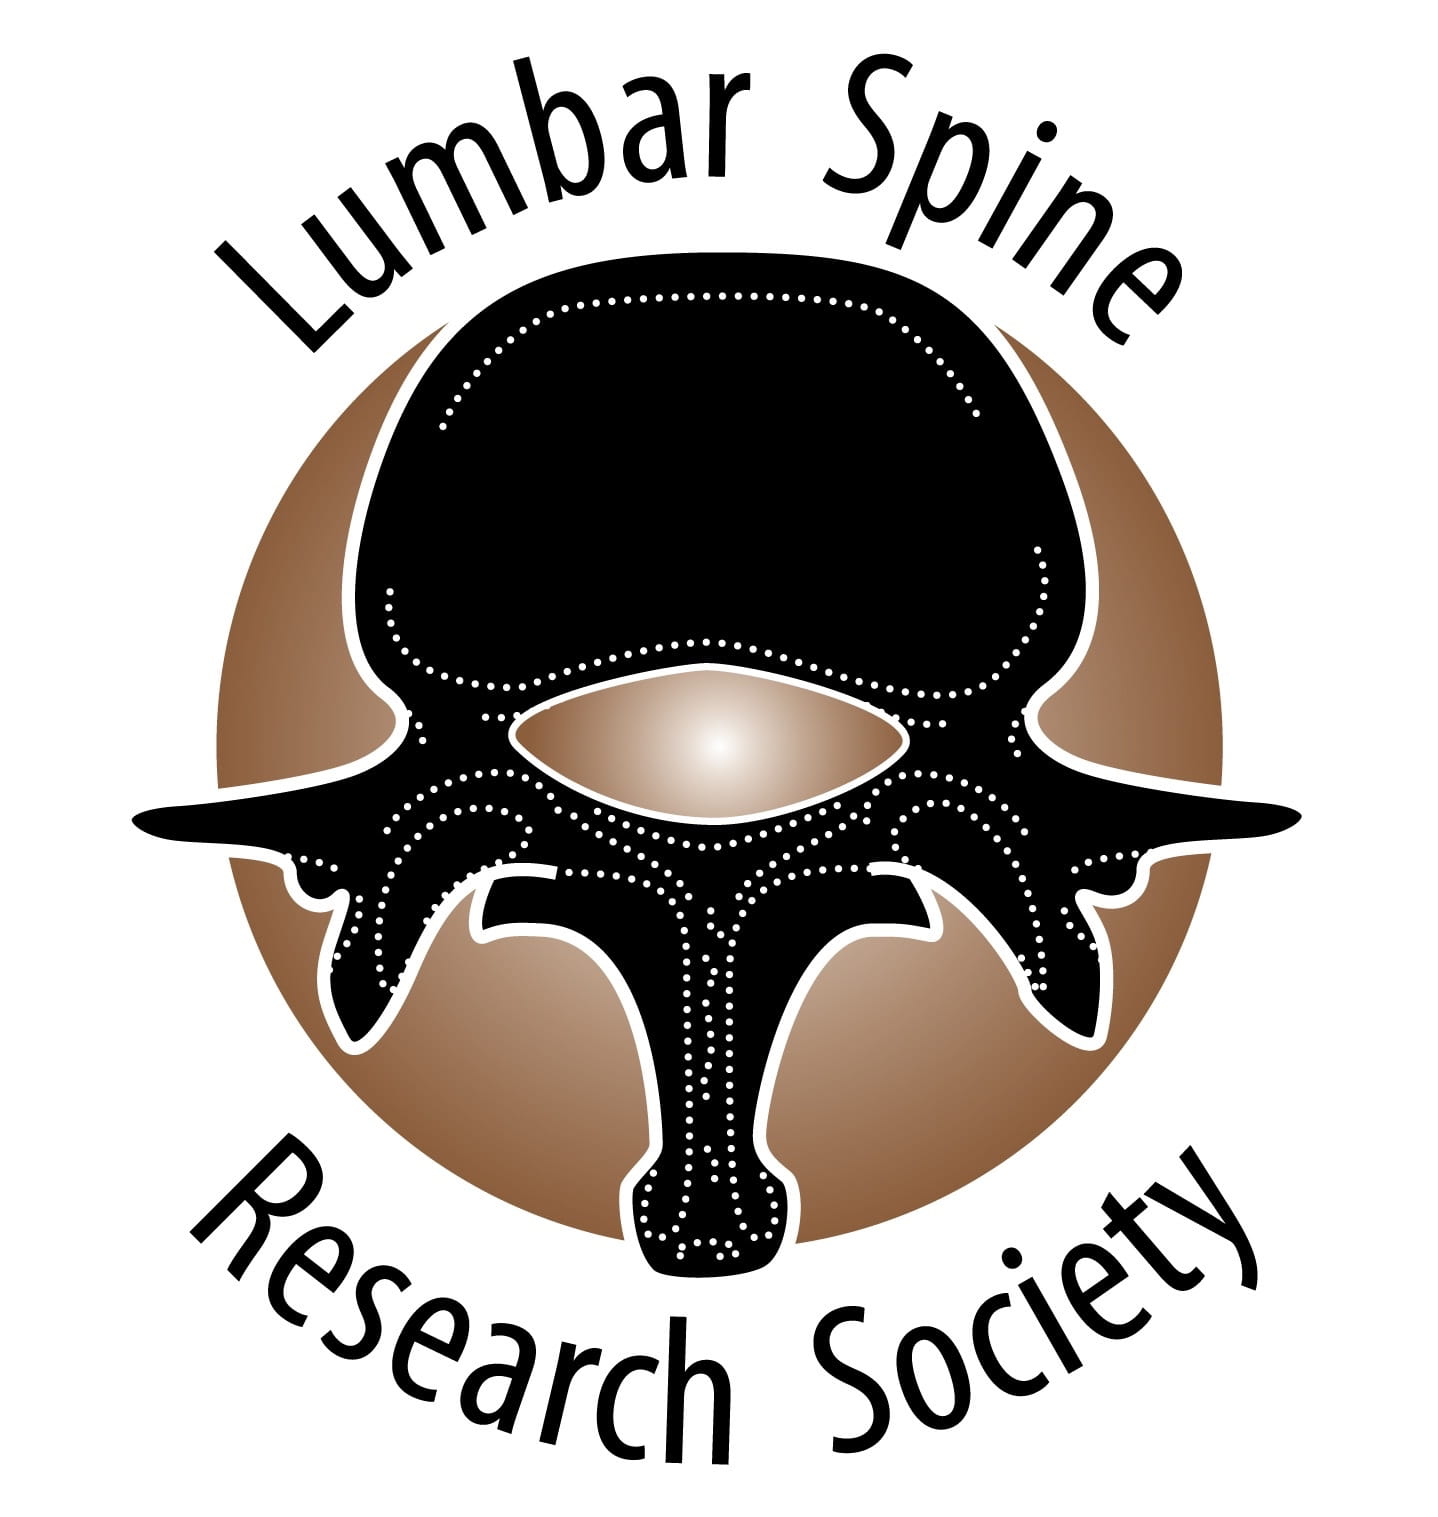 Lumbar Spine Research Society